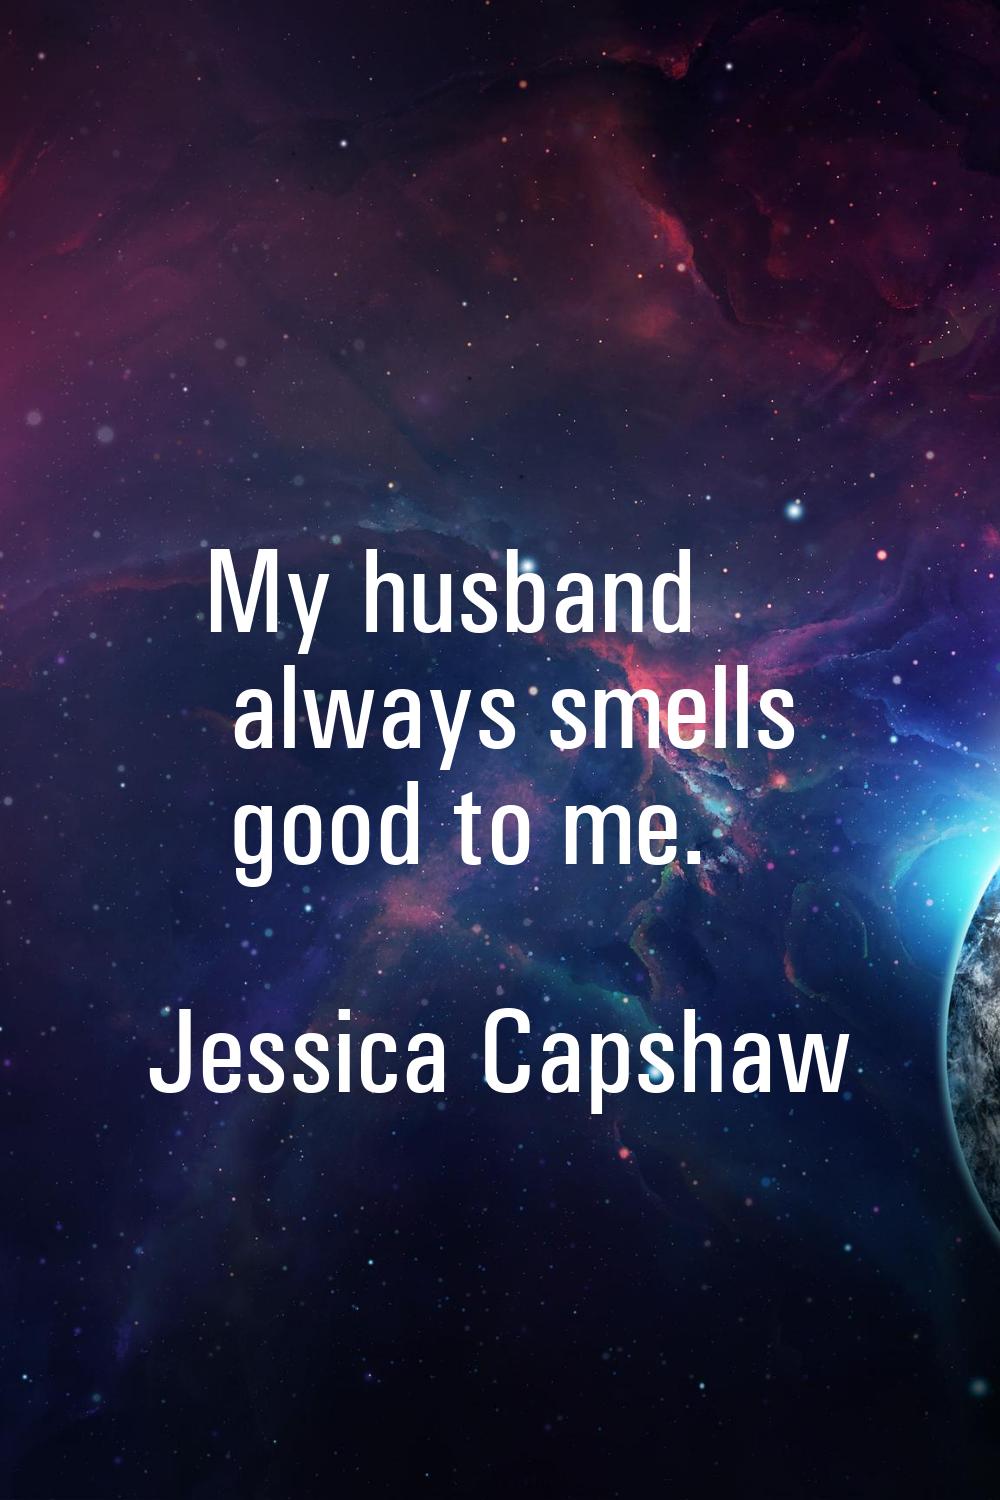 My husband always smells good to me.